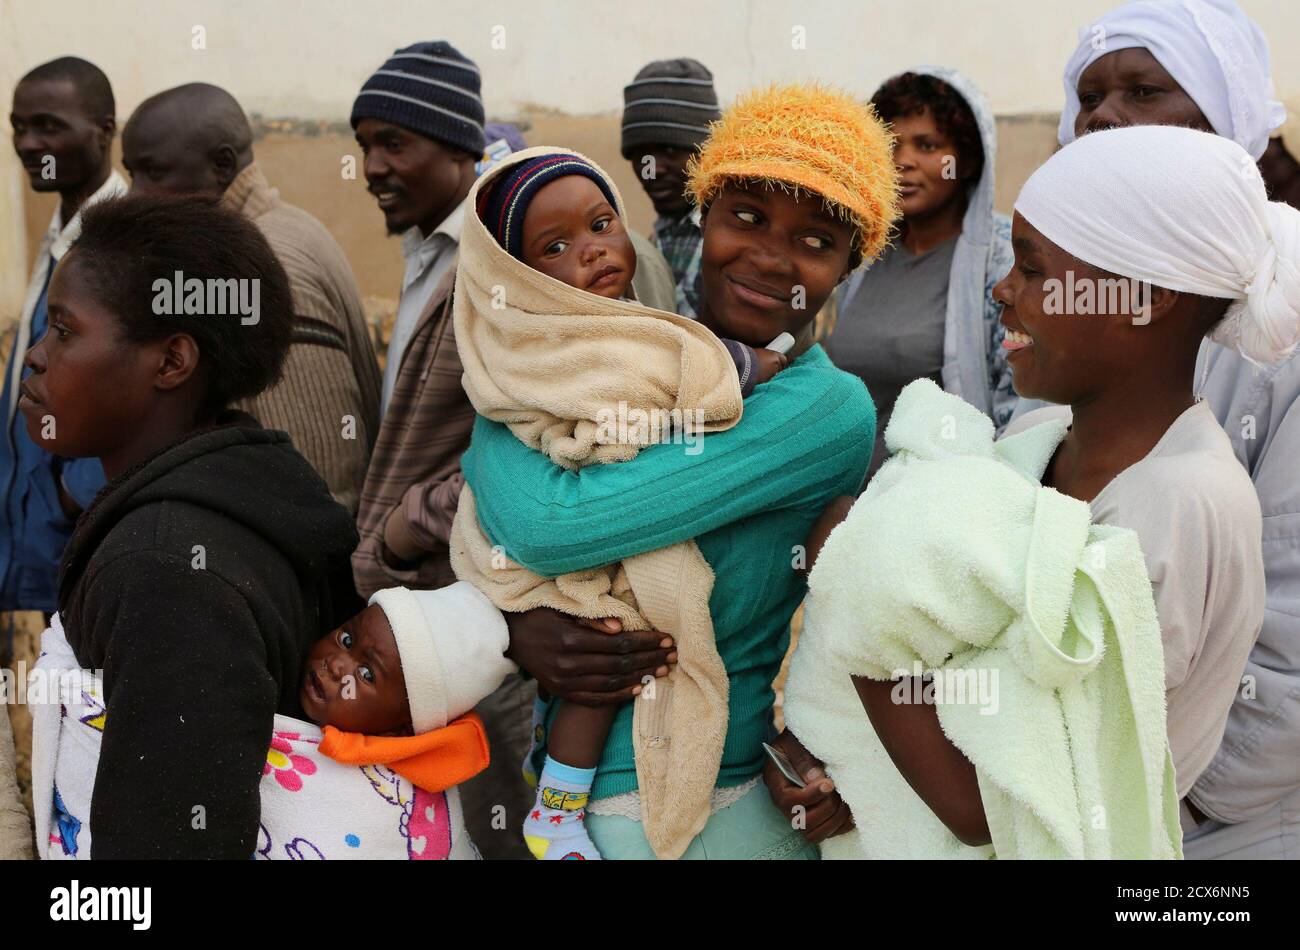 Zimbabwean women react as they wait to casts their votes at a polling  station in Domboshava, about 45 km (28 miles) north of Harare July 31,  2013. Zimbabweans voted in large numbers